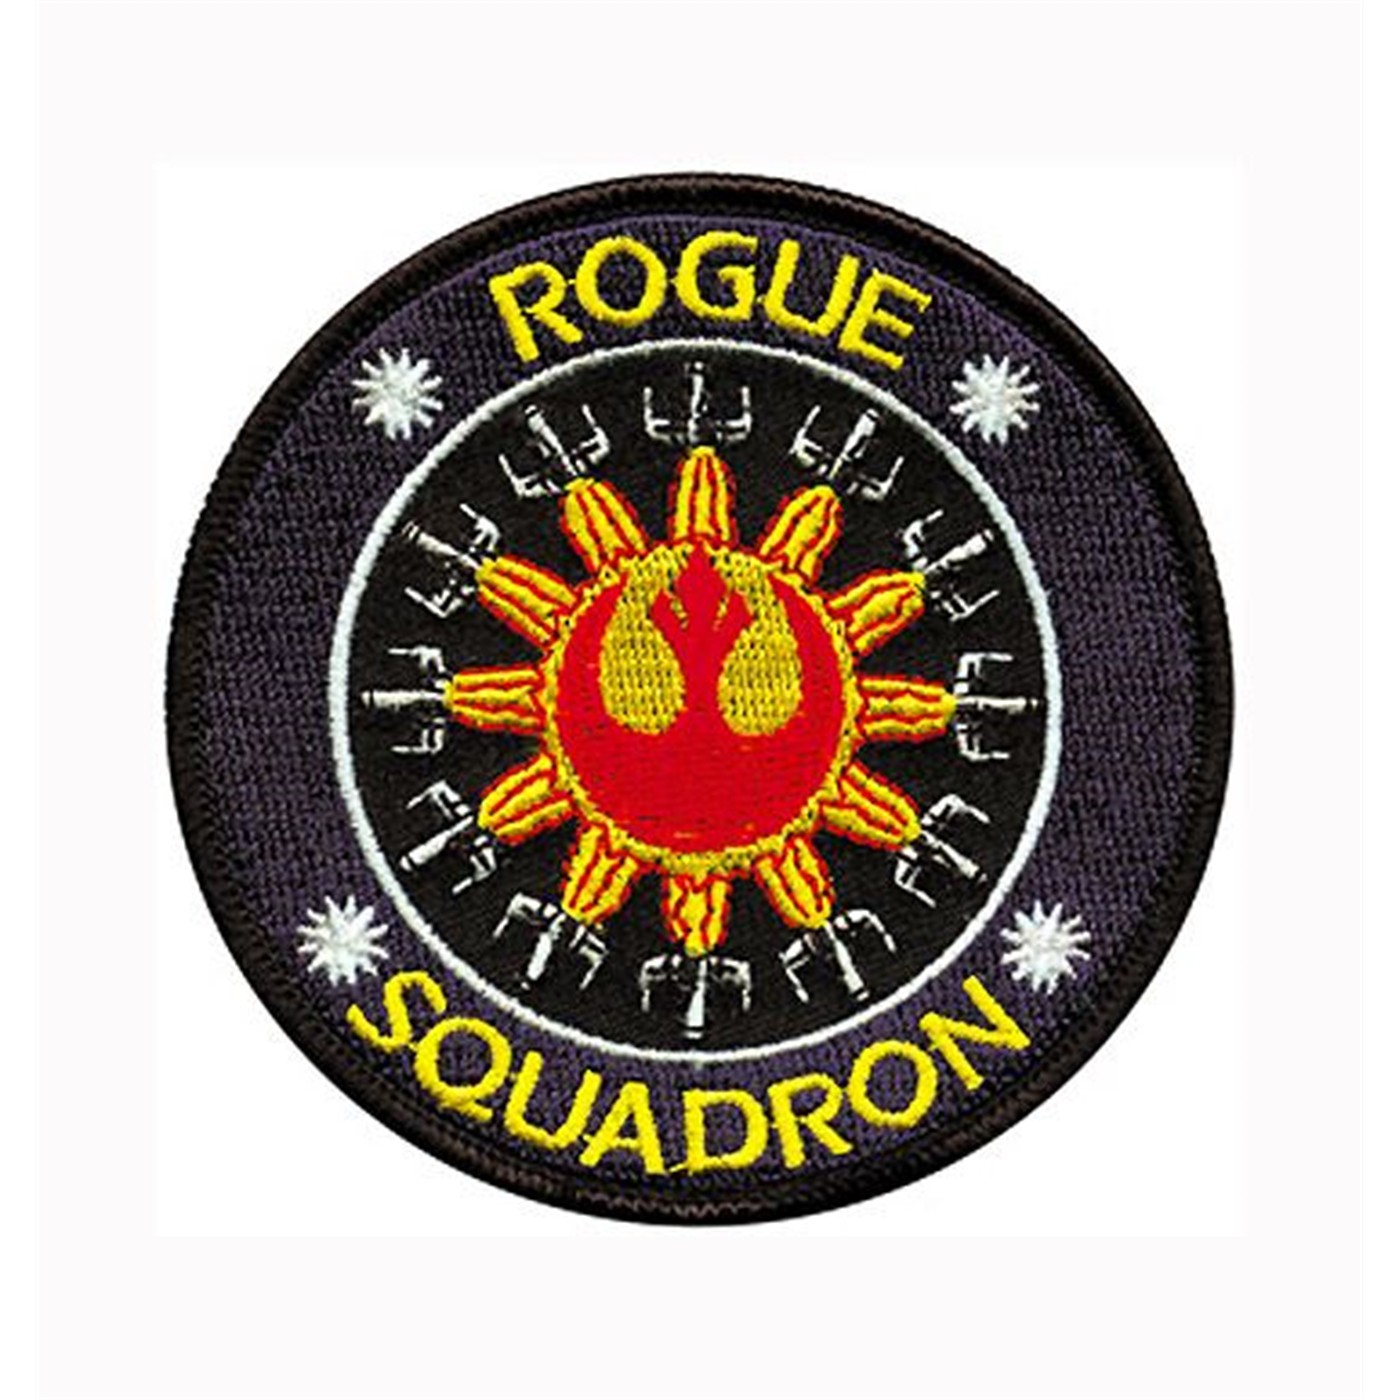 Rogue Squadron Star Wars Patch